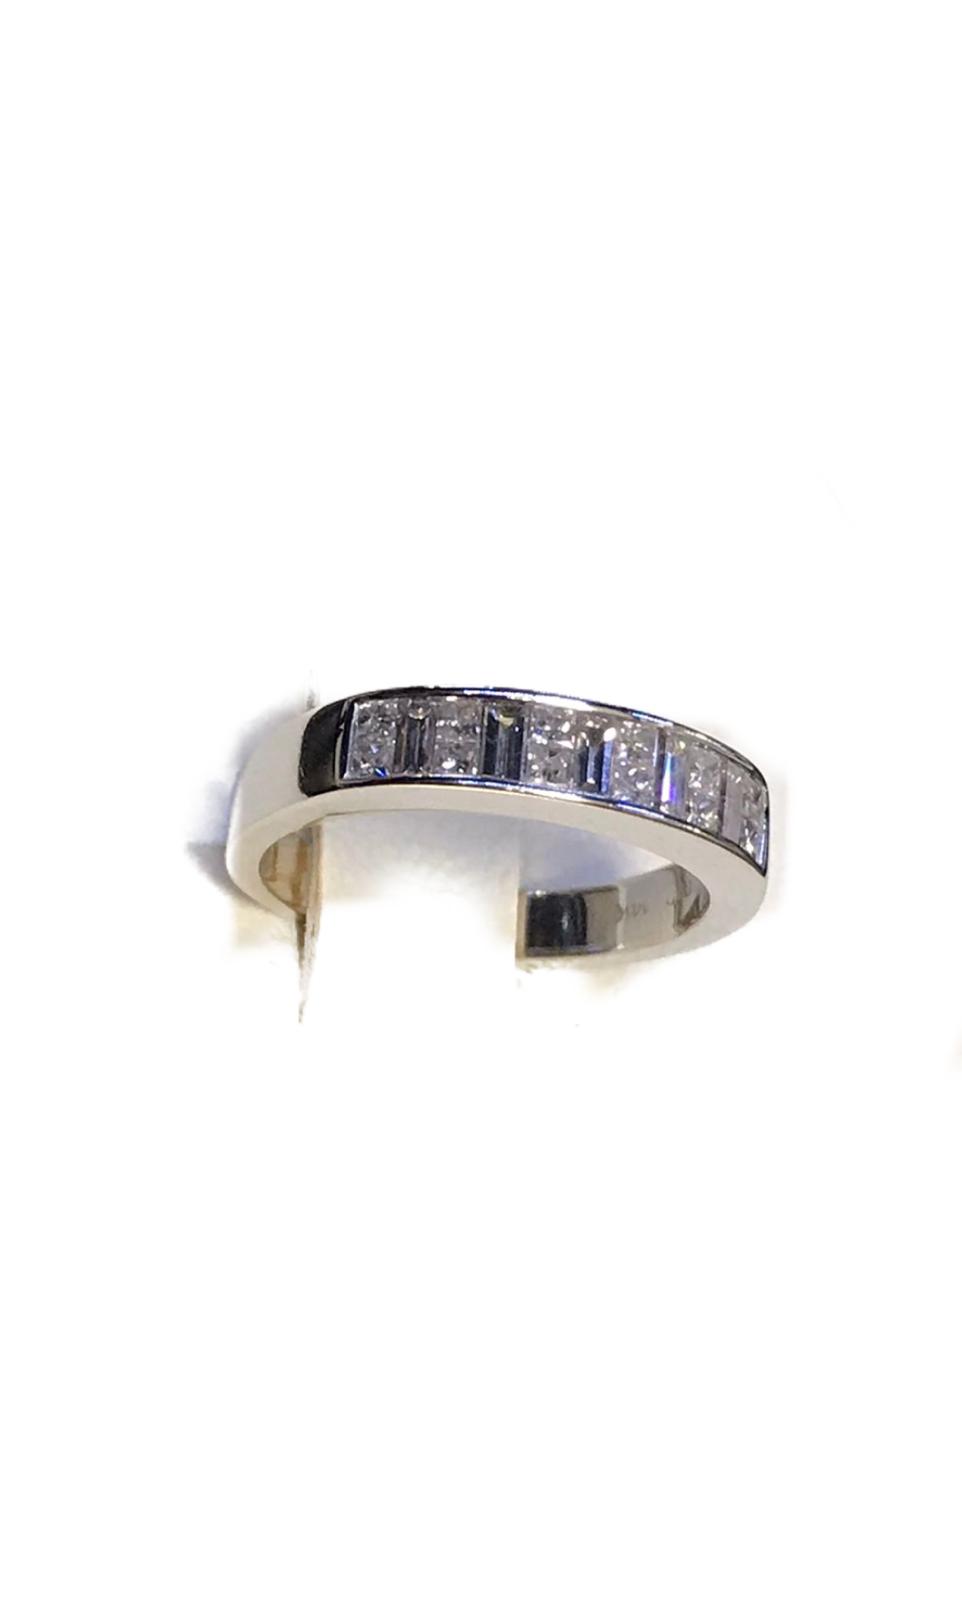 14Kt White Gold and Diamond Ring #4112